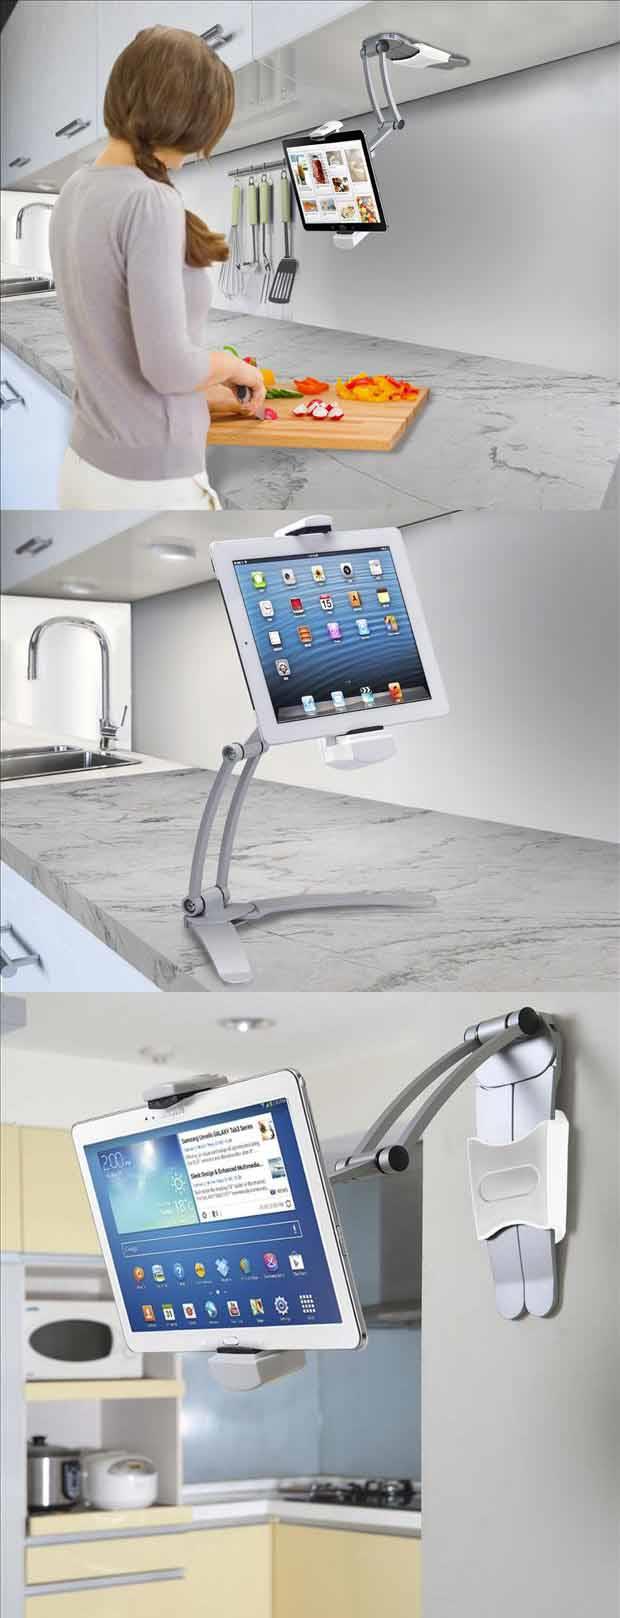 iPad Holder for the kitchen